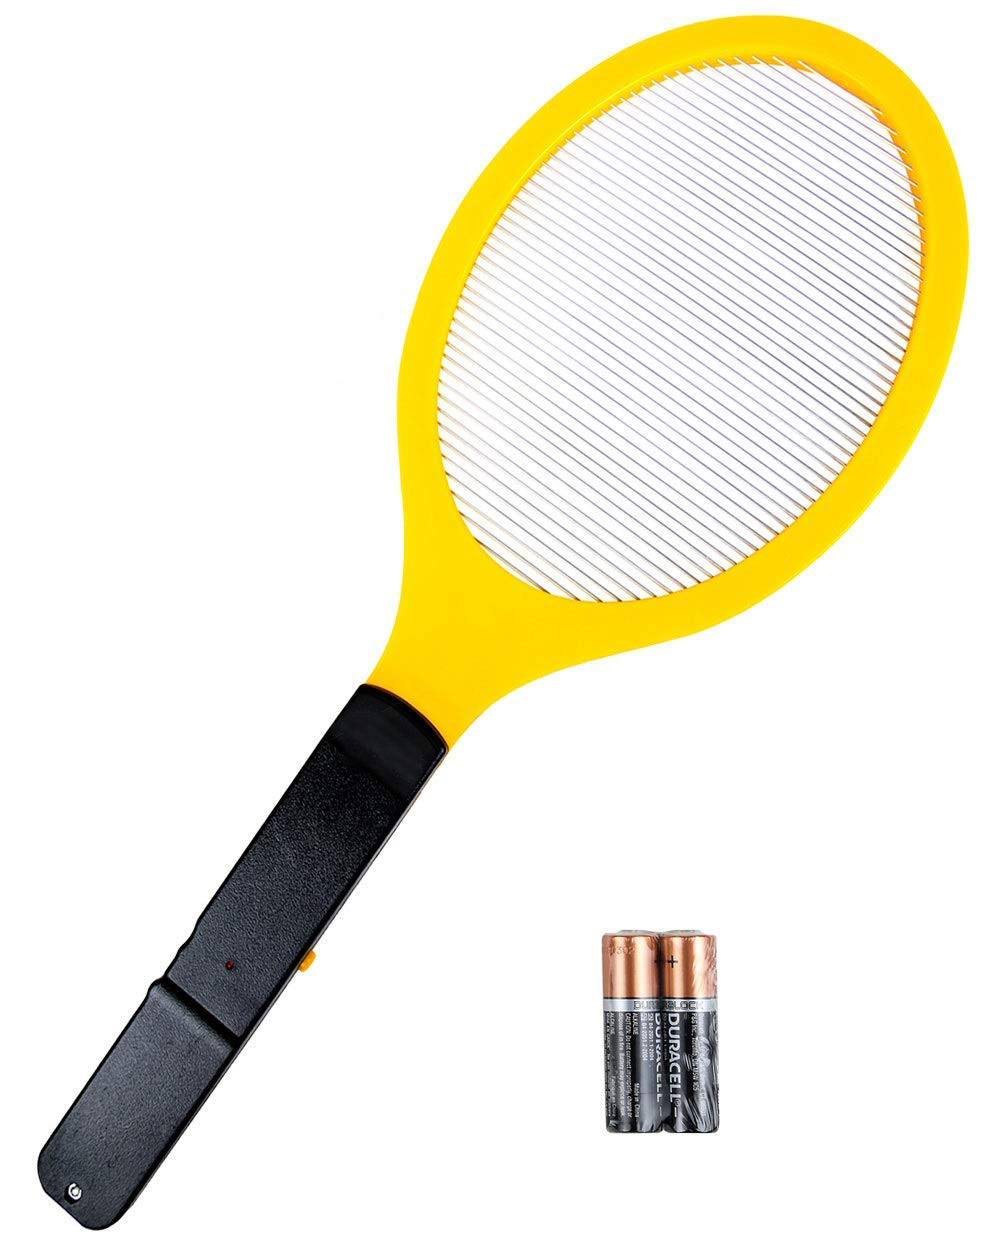 Zap Electric Bug Racket Fly Swatter Mosquito Indoor and Outdoor, Pest Control, Fly Killer - image 3 of 8